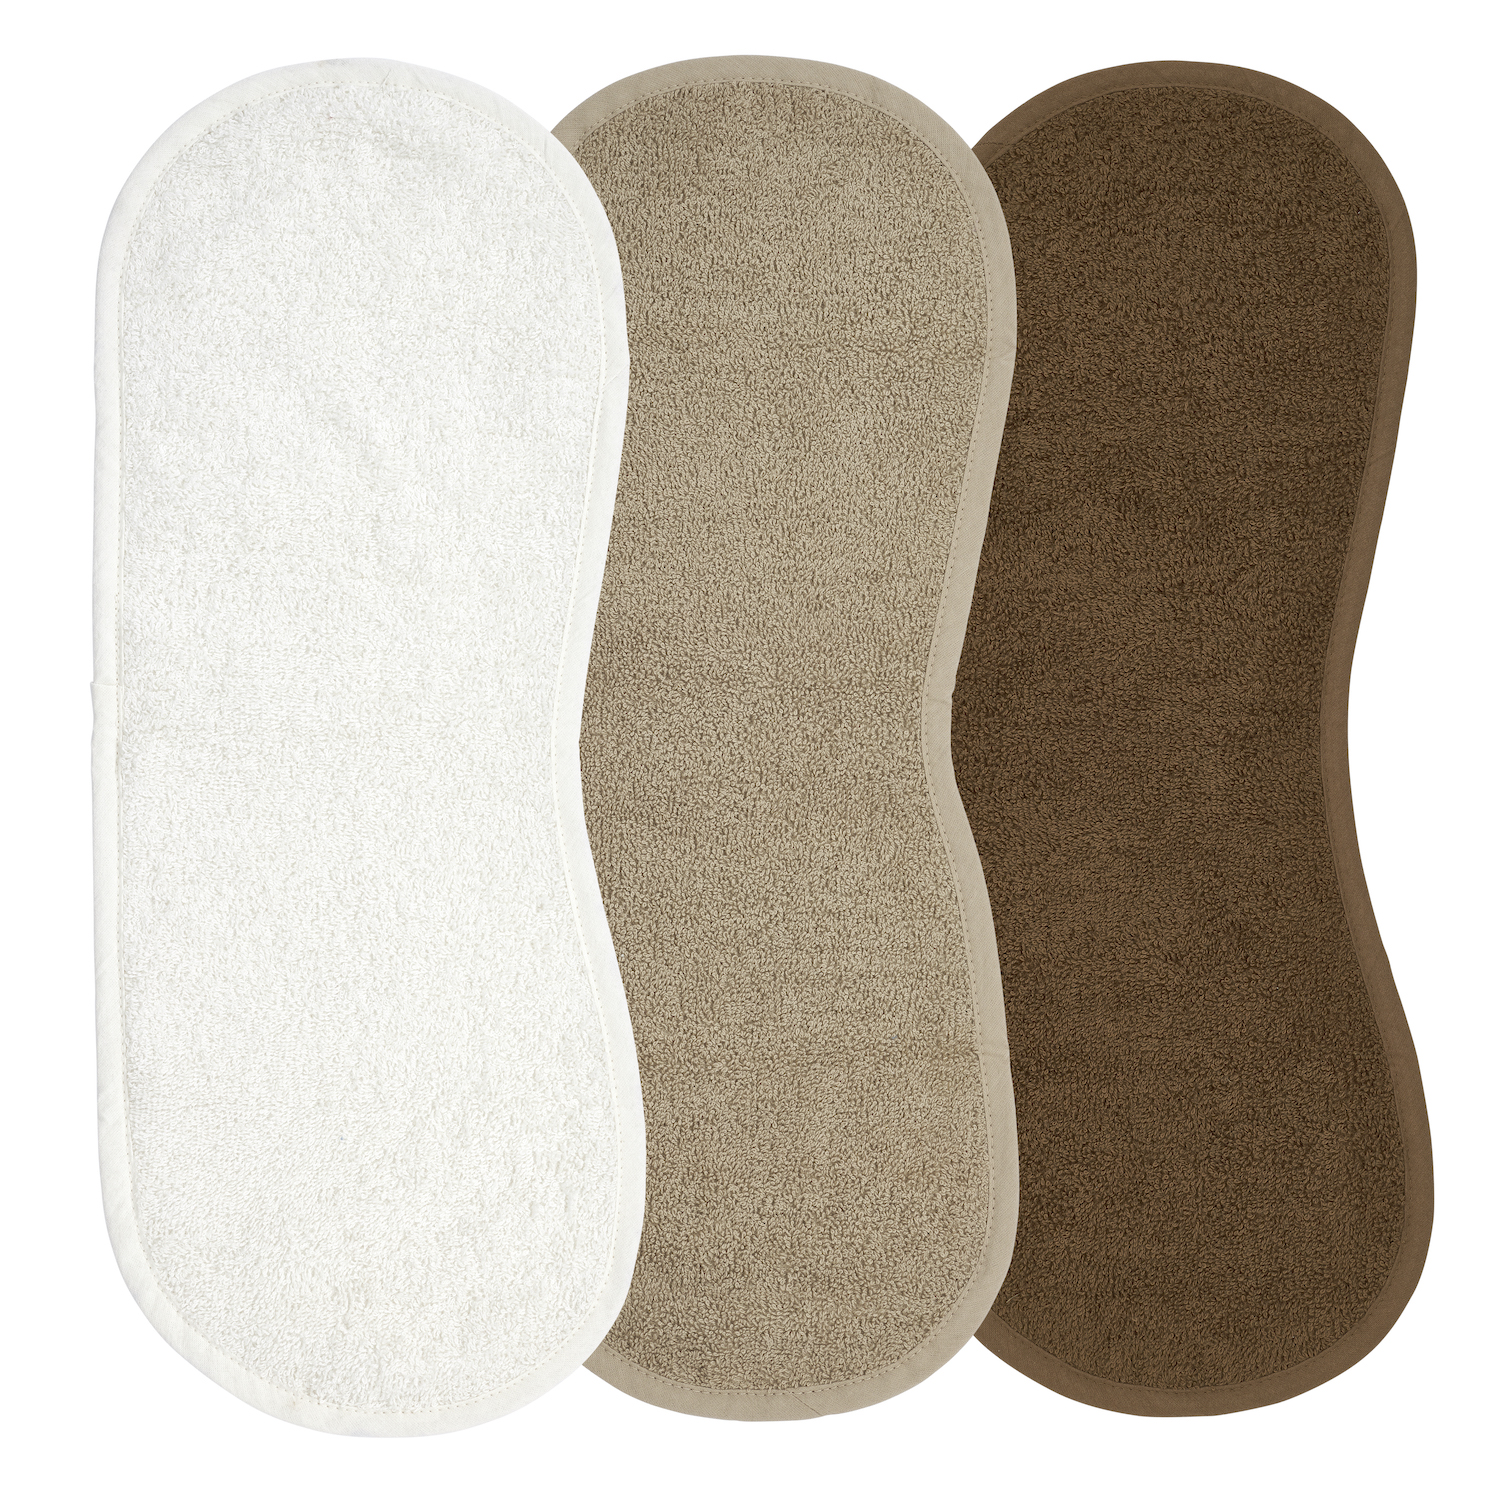 Spucktuch XL Frottee 3-pack  - Offwhite/Taupe/Chocolate - 53x20cm